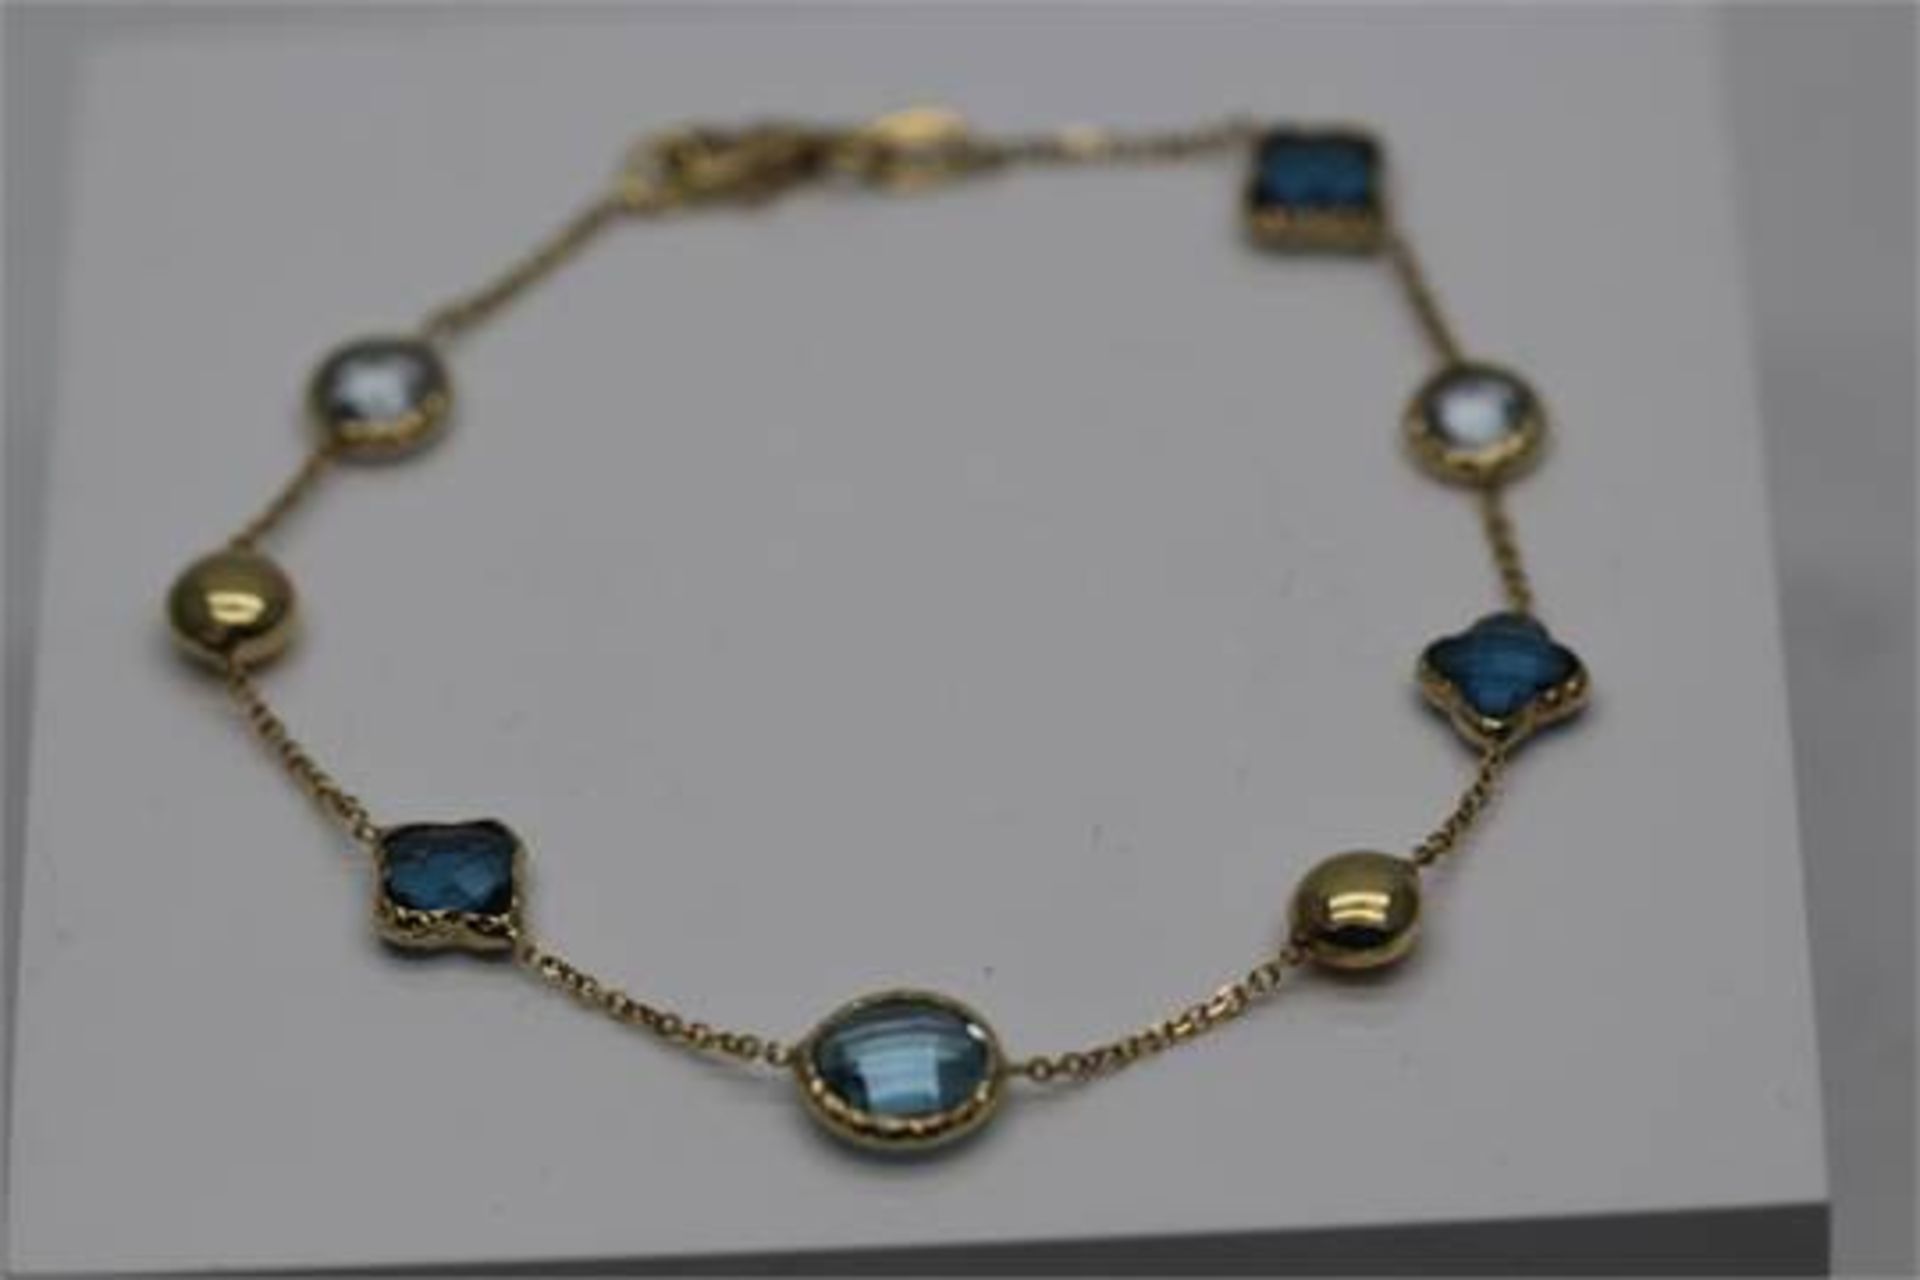 YELLOW GOLD LADIES BRACELET SET WITH APPROX 7.00 CARATS OF TOPAZ STONES (PV-JH)